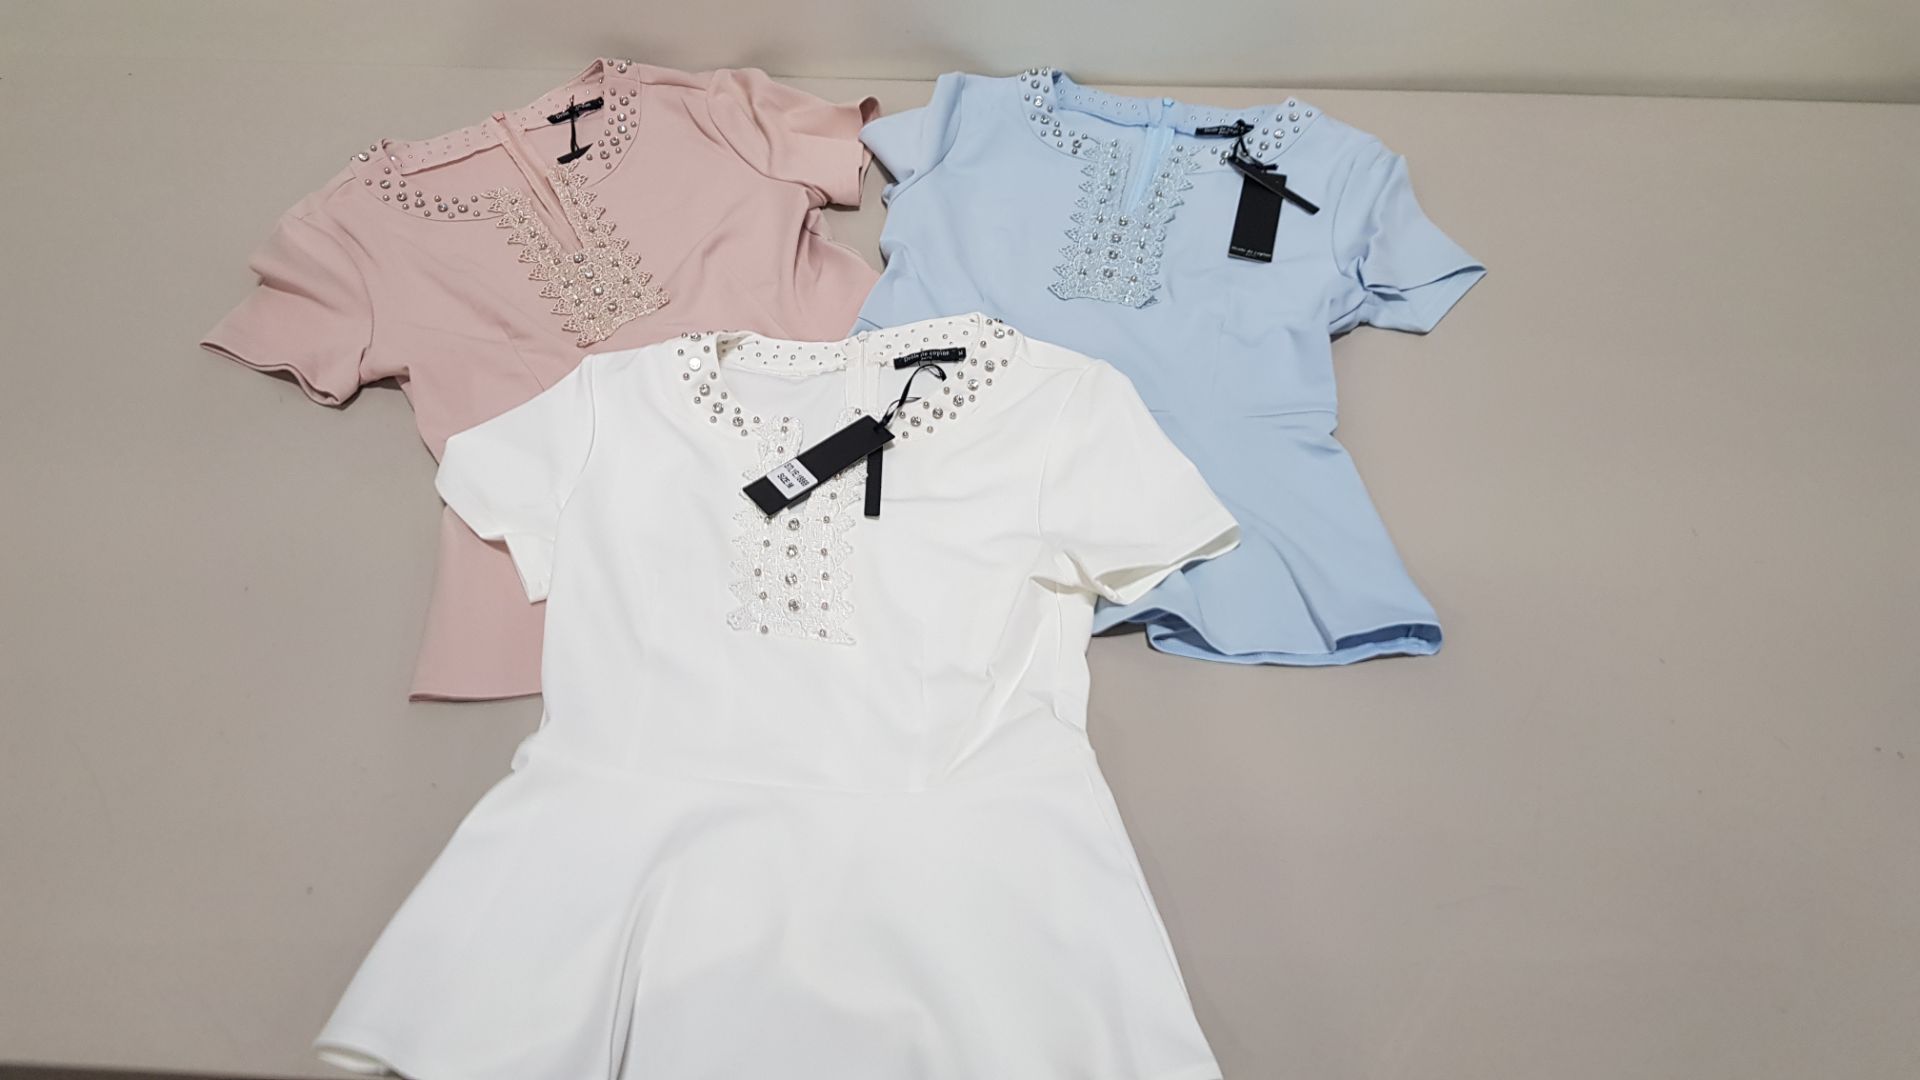 20 X BRAND NEW DROLE DE COPINE NUDE, LIGHT BLUE AND WHITE STUDDED TOPS IN VARIOUS SIZES